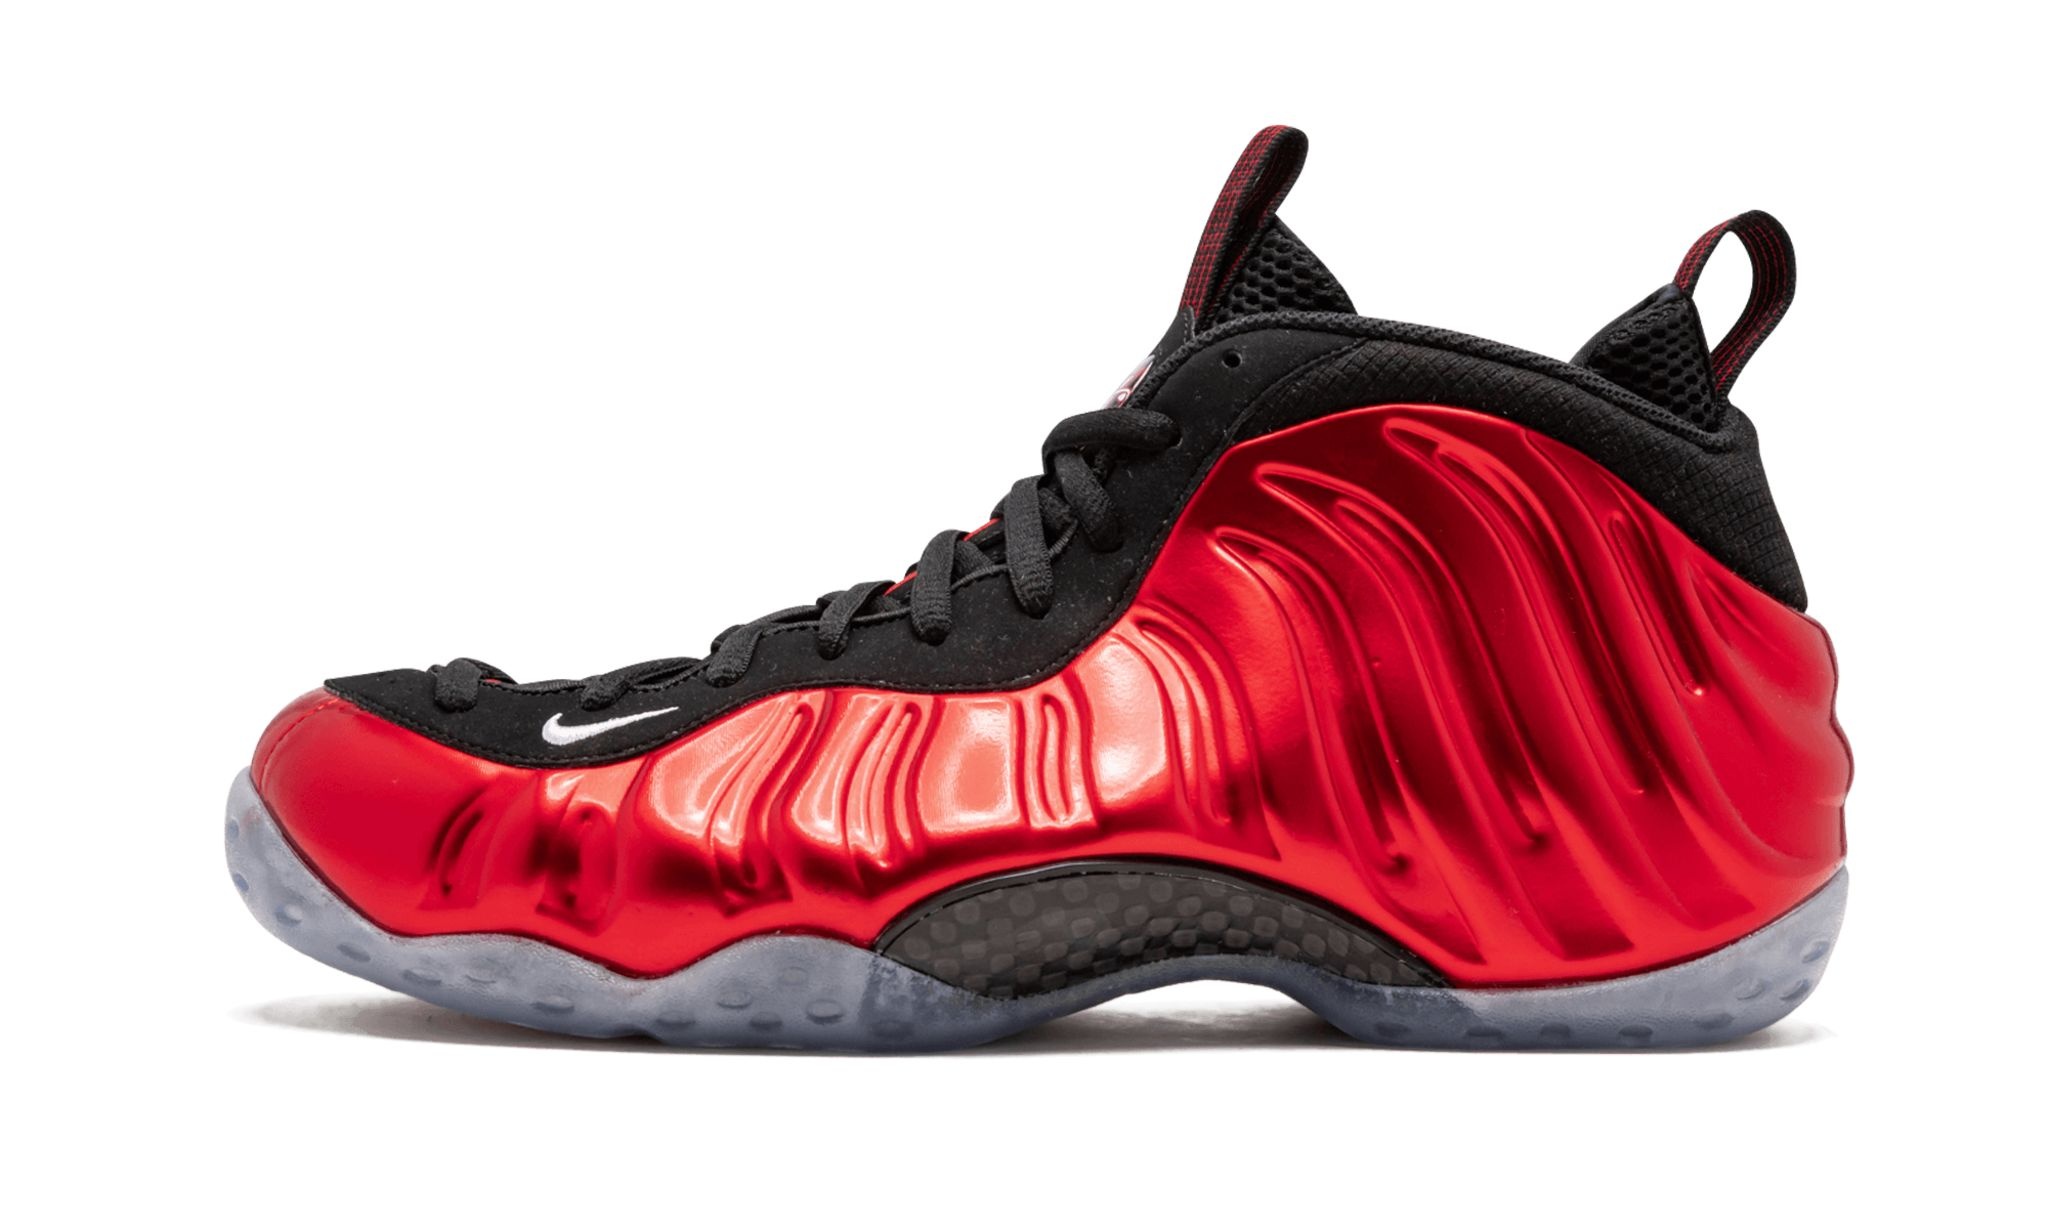 Air Foamposite One "Metallic Red" - 1